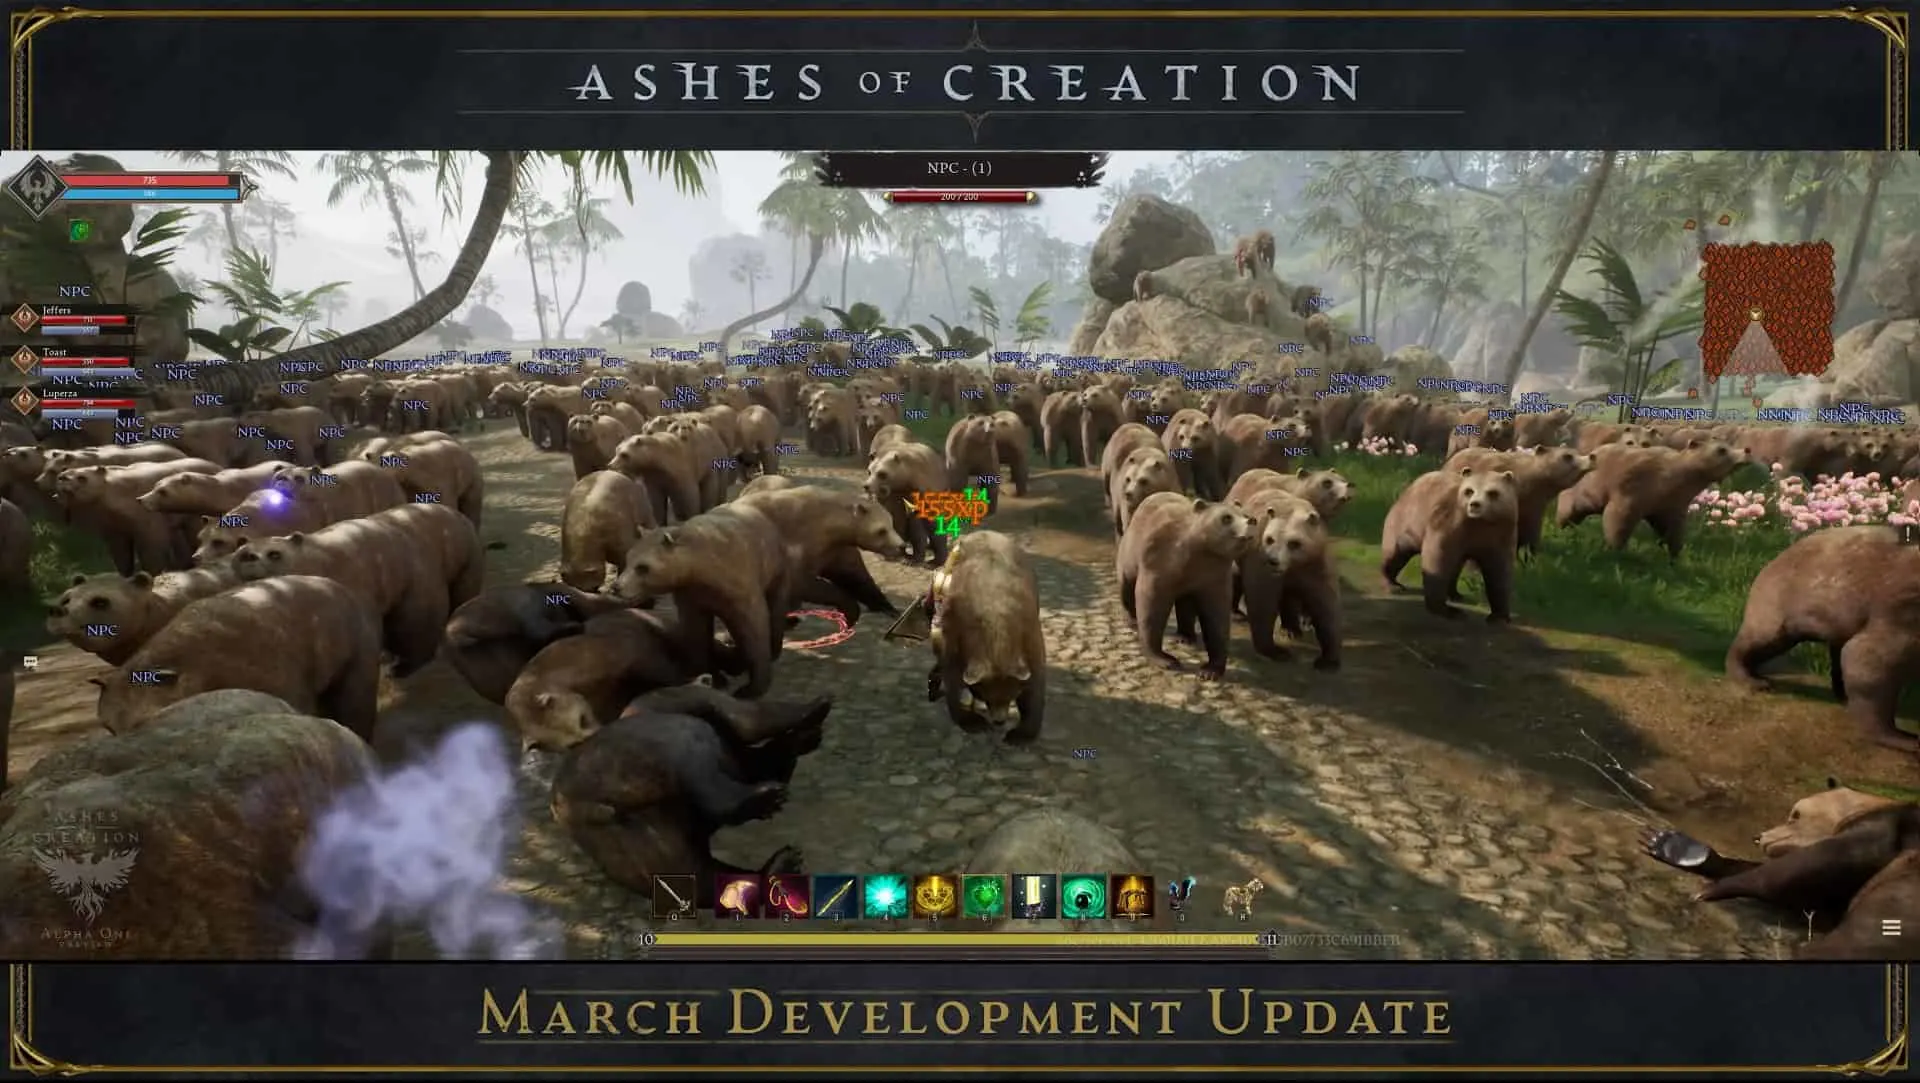 Ashes of Creation Team Fights More Than 1000 Bears In March Update 3